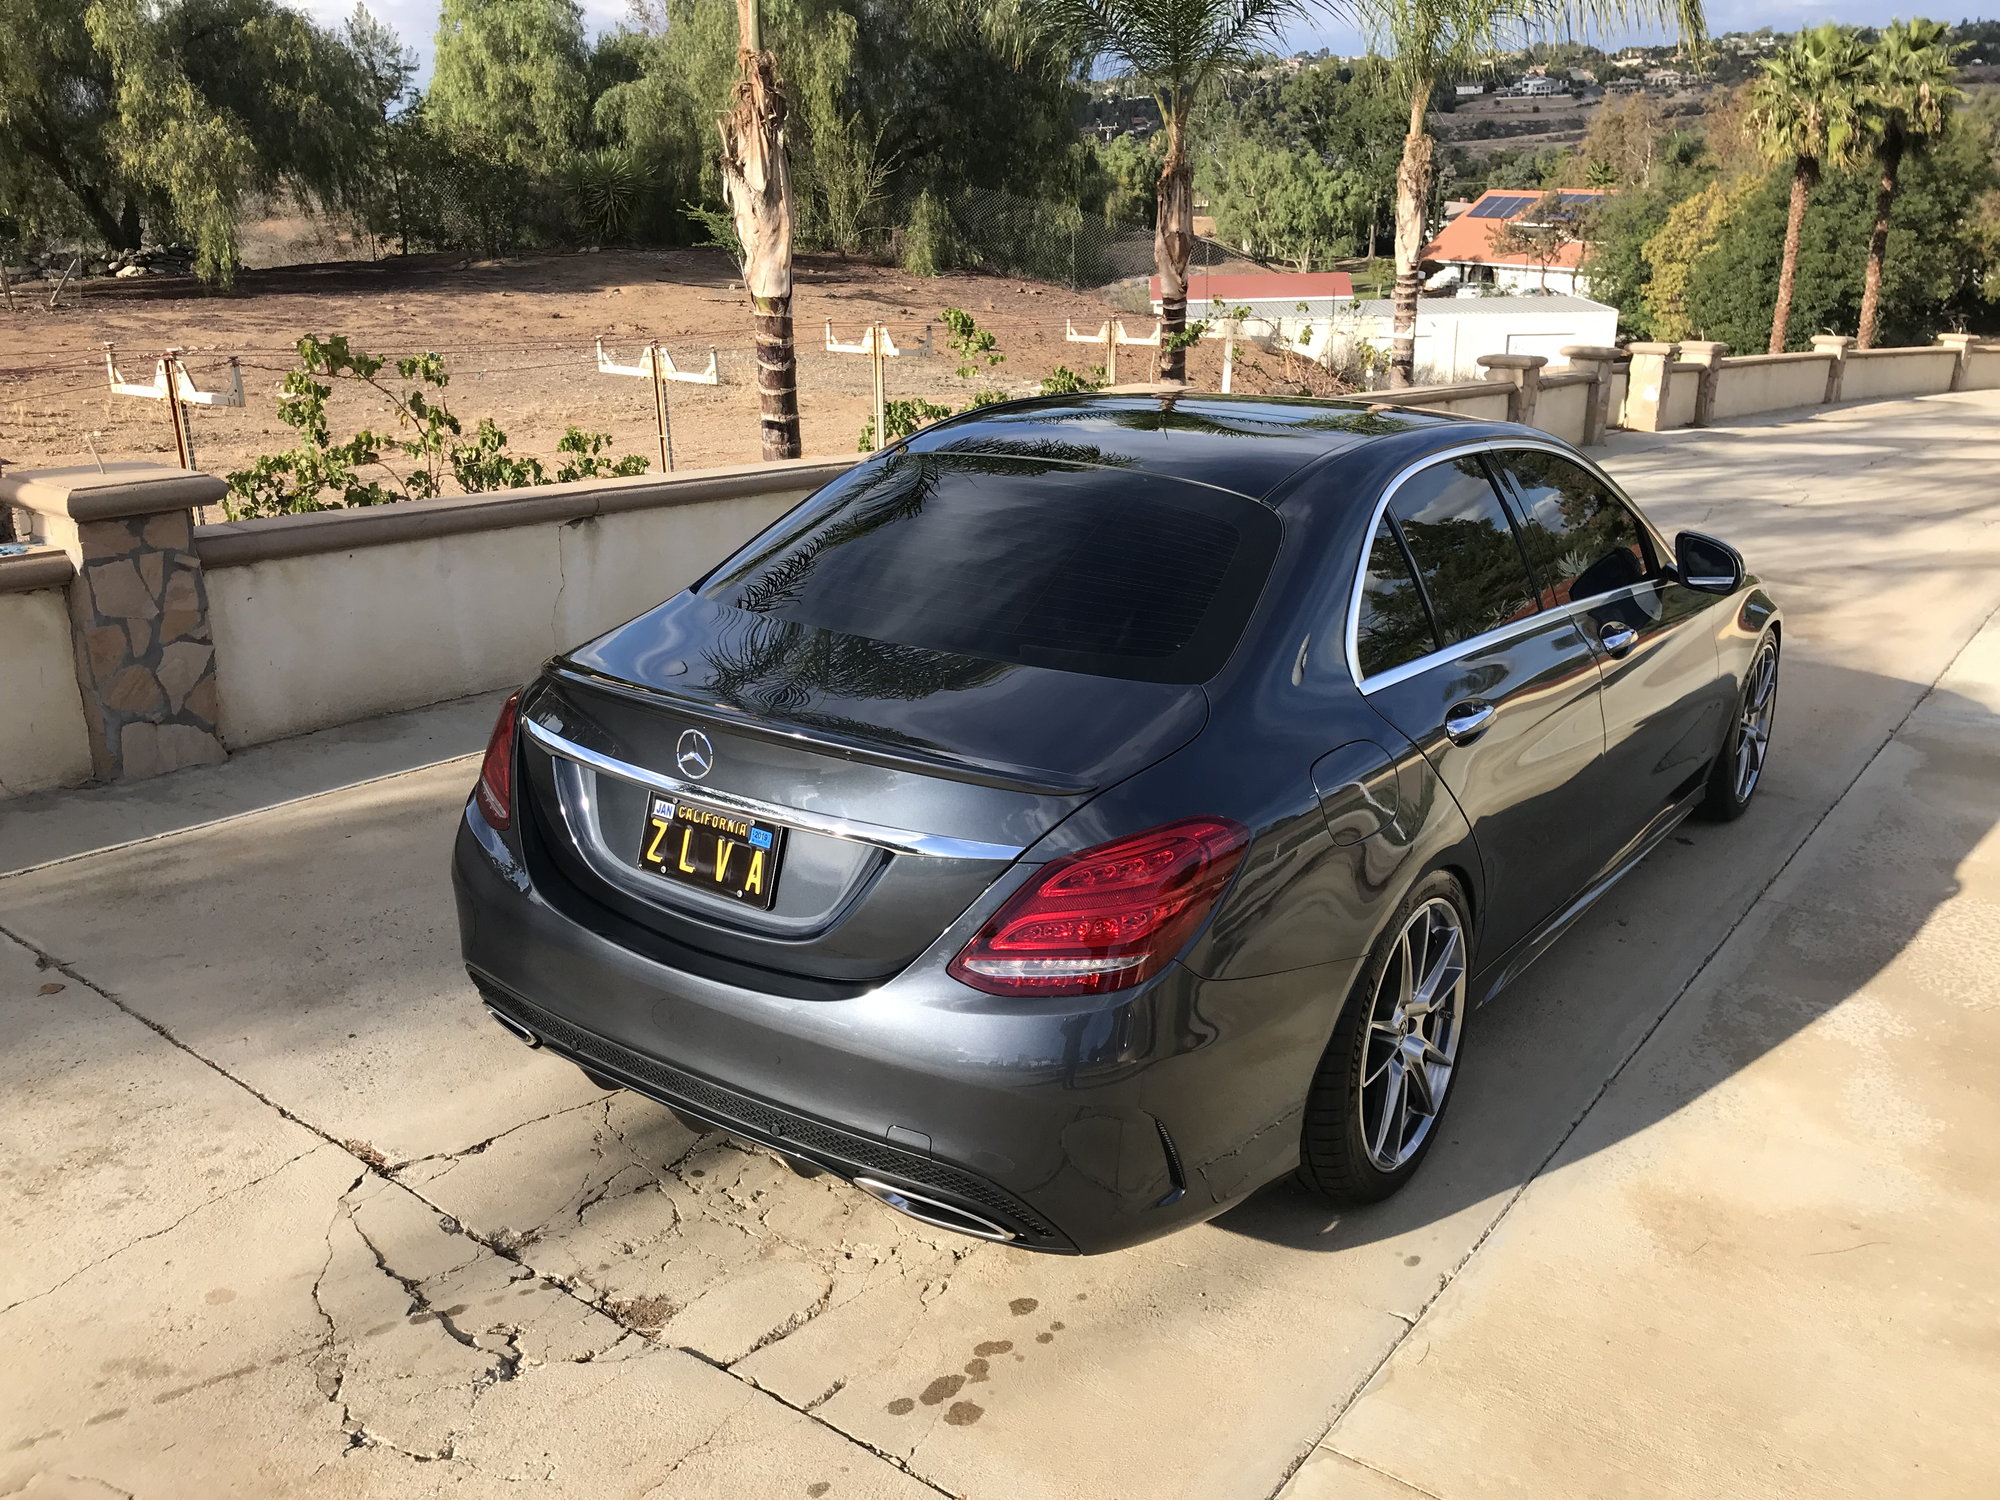 2016 Mercedes-Benz C300 - 2016 Mercedes C300 Sport in excellent condition AMG package - Used - VIN 55swf4jb8gu130716 - 42,600 Miles - 4 cyl - 2WD - Automatic - Sedan - Gray - Riverside, CA 92504, United States